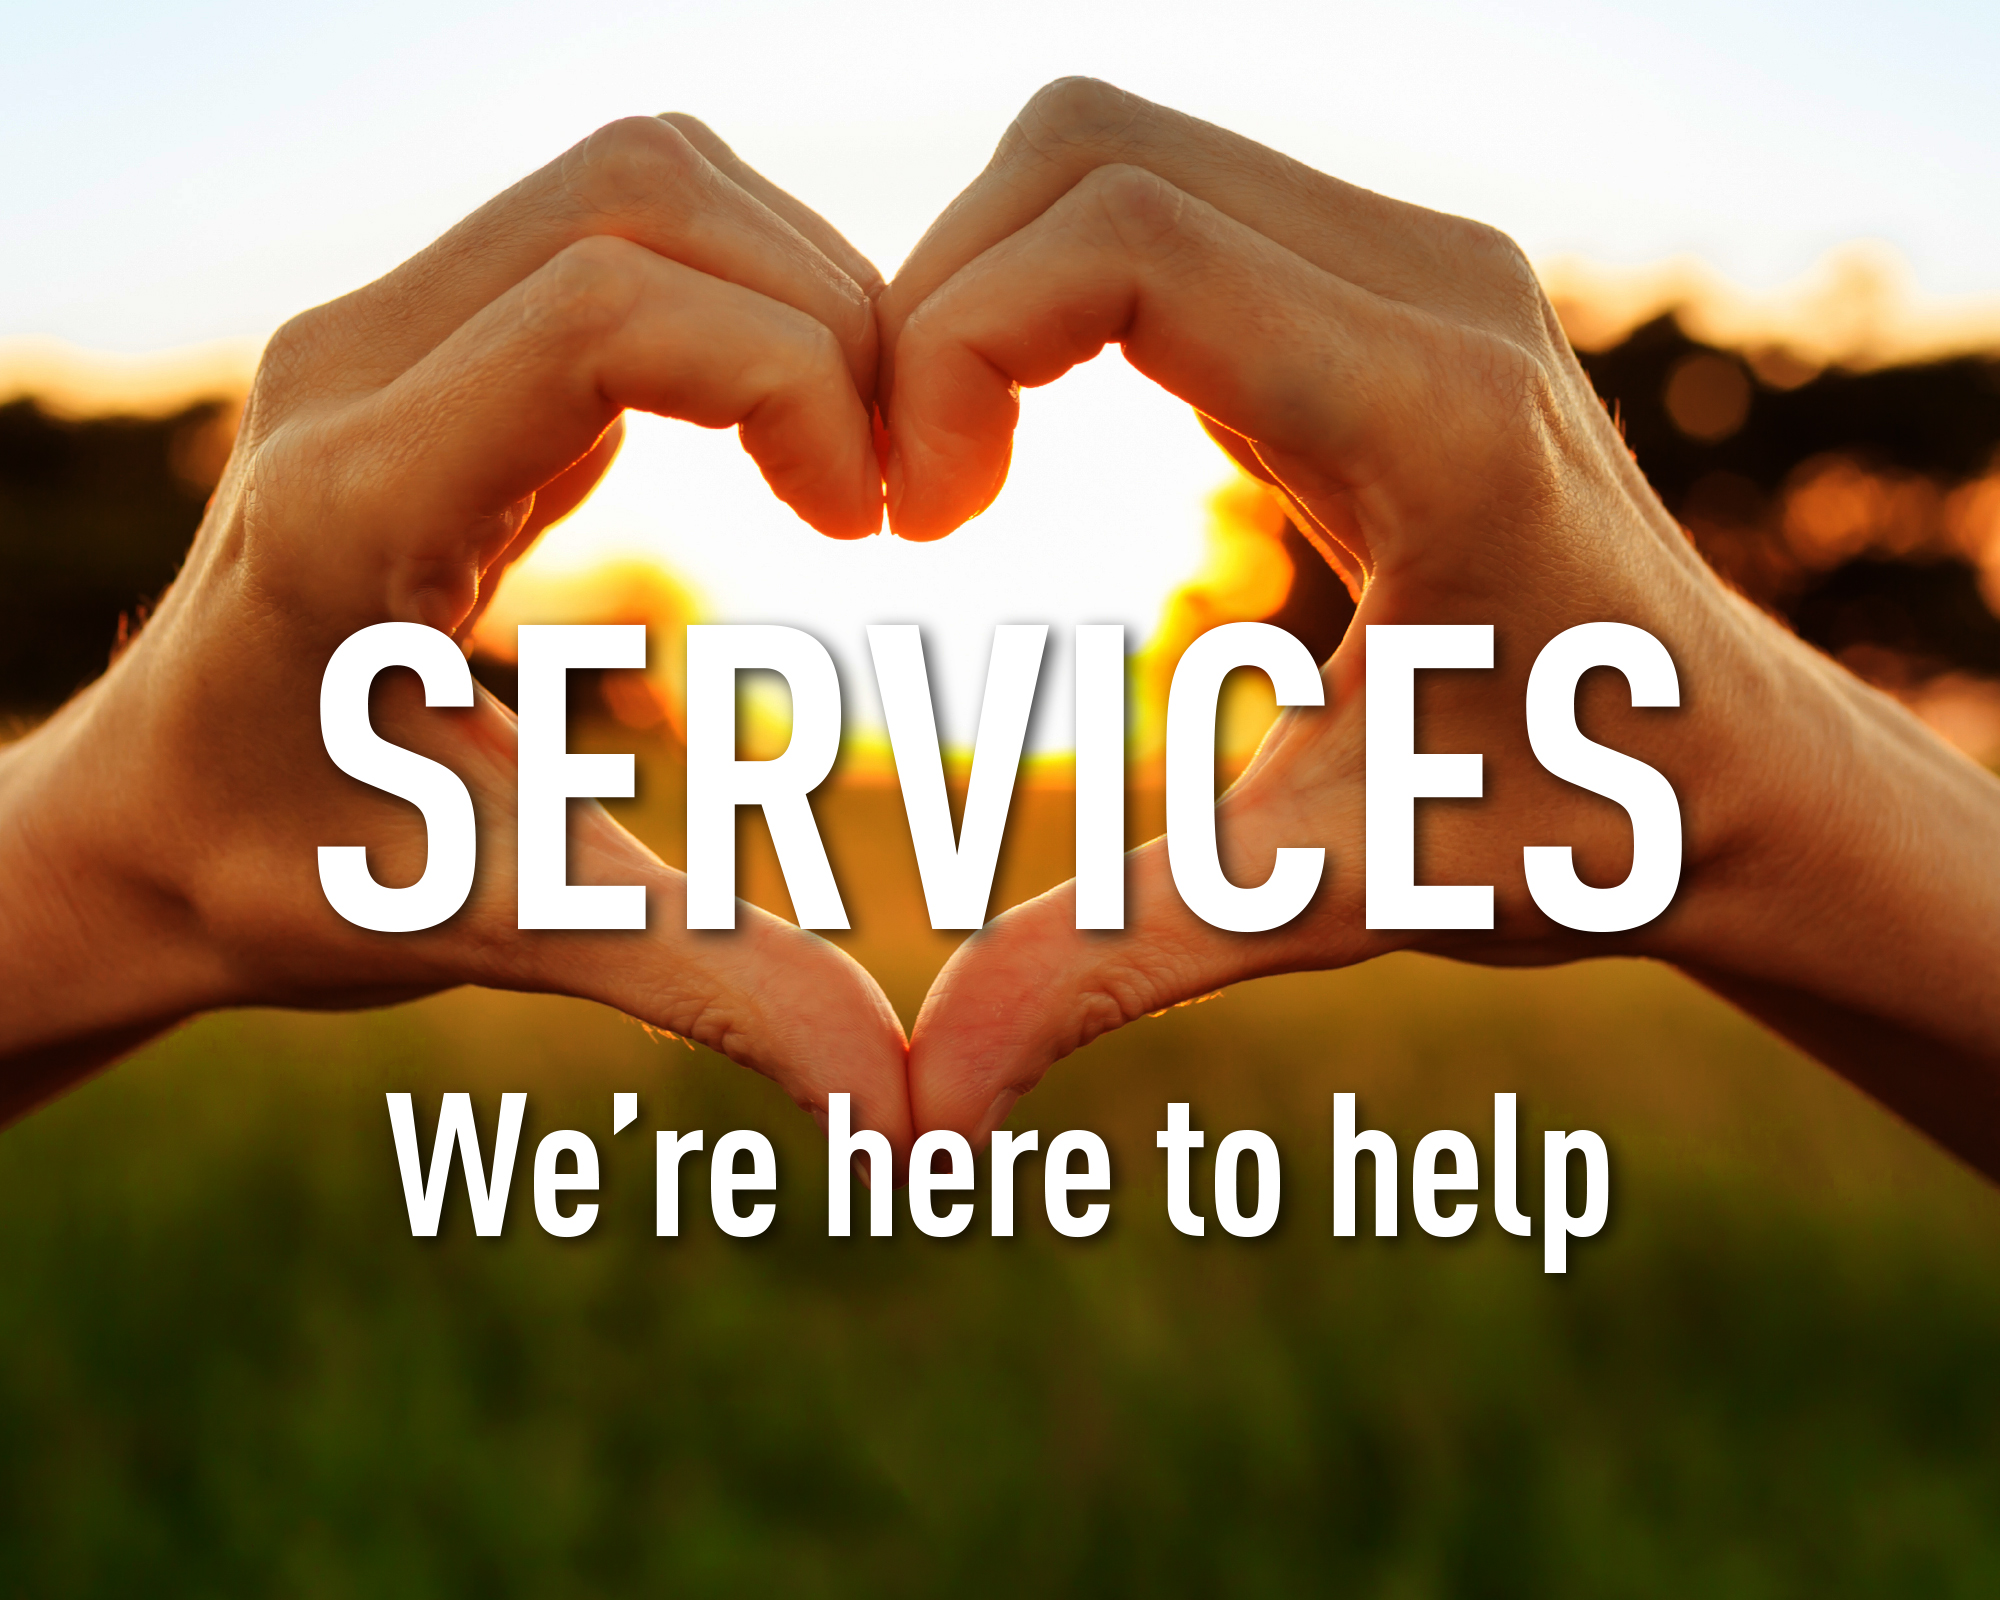 Services. We're here to help.